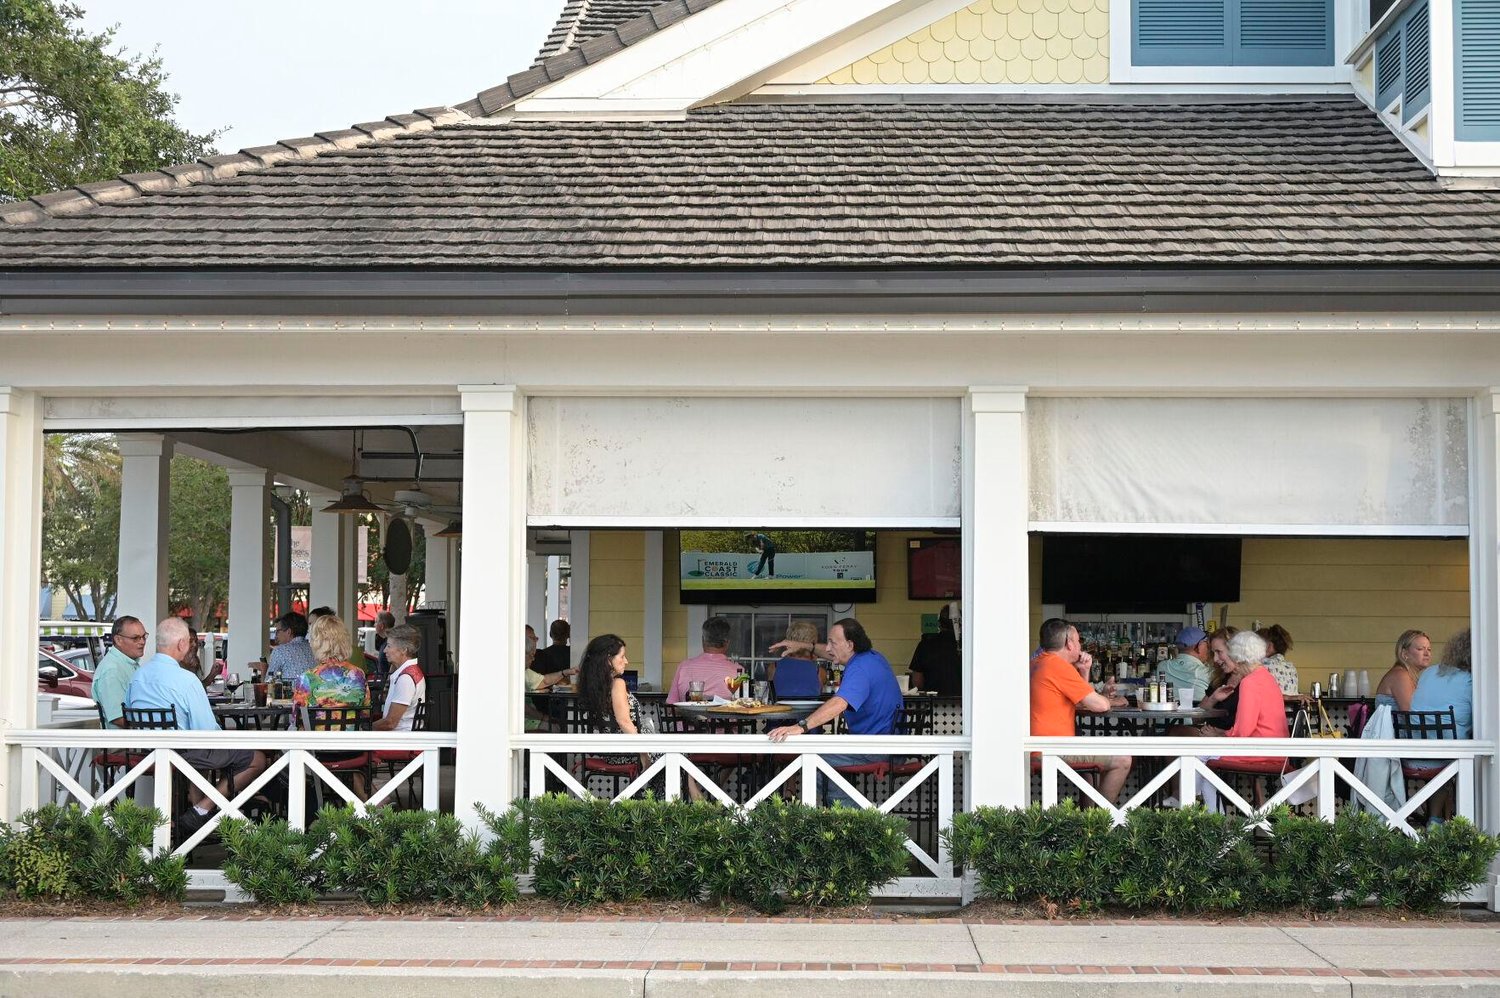 People sit in an outdoor dining area of a restaurant in the Lake Sumter Landing Market Square, Thursday, Aug. 12, 2021, in The Villages, Fla. 
AP Photo/Phelan M. Ebenhack